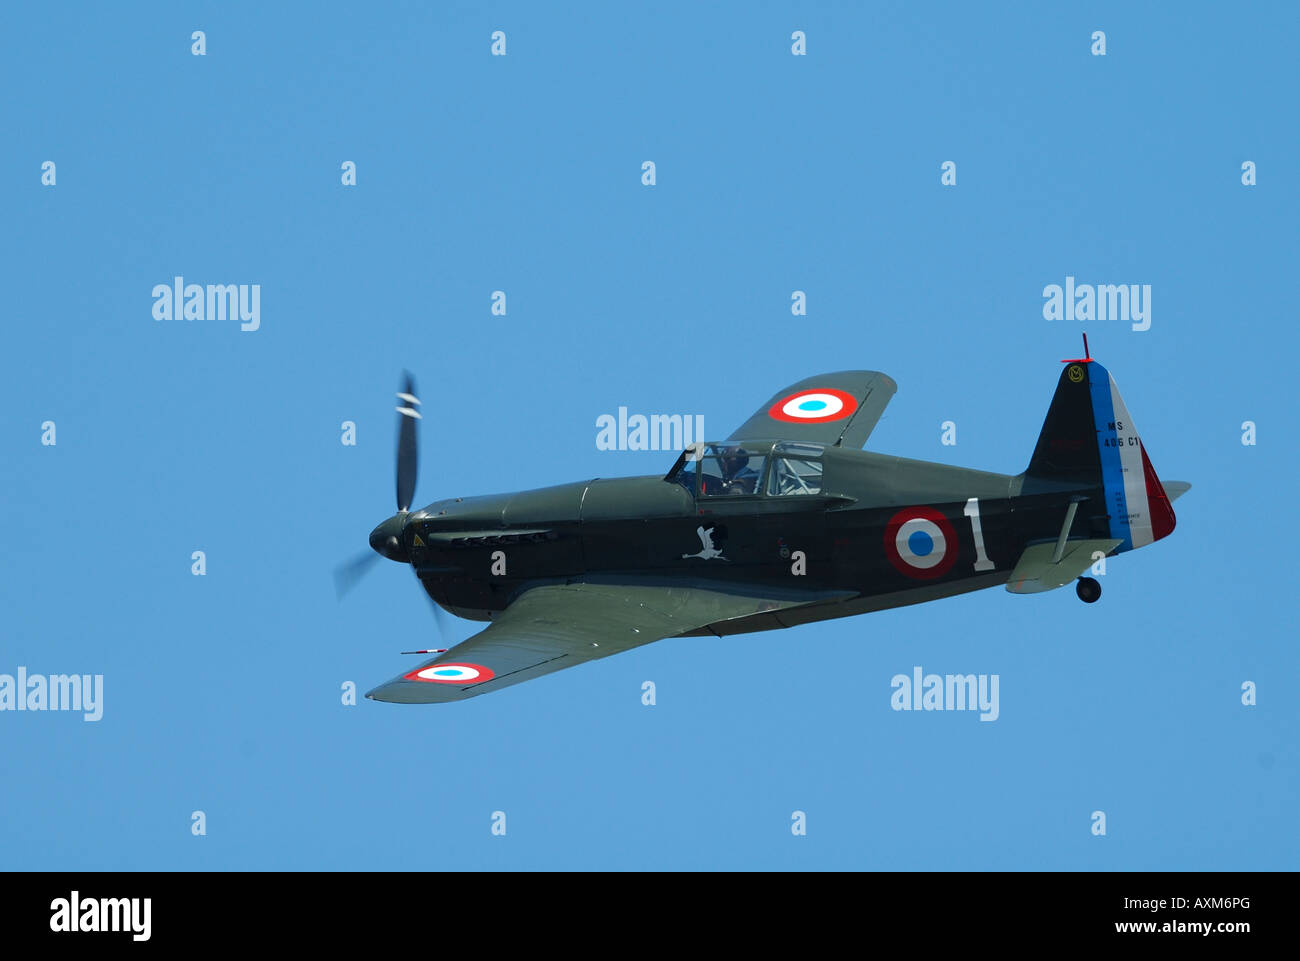 Morane Saulnier MS-406 (D-3801), rare and historic WWII french fighter plane in flight Stock Photo